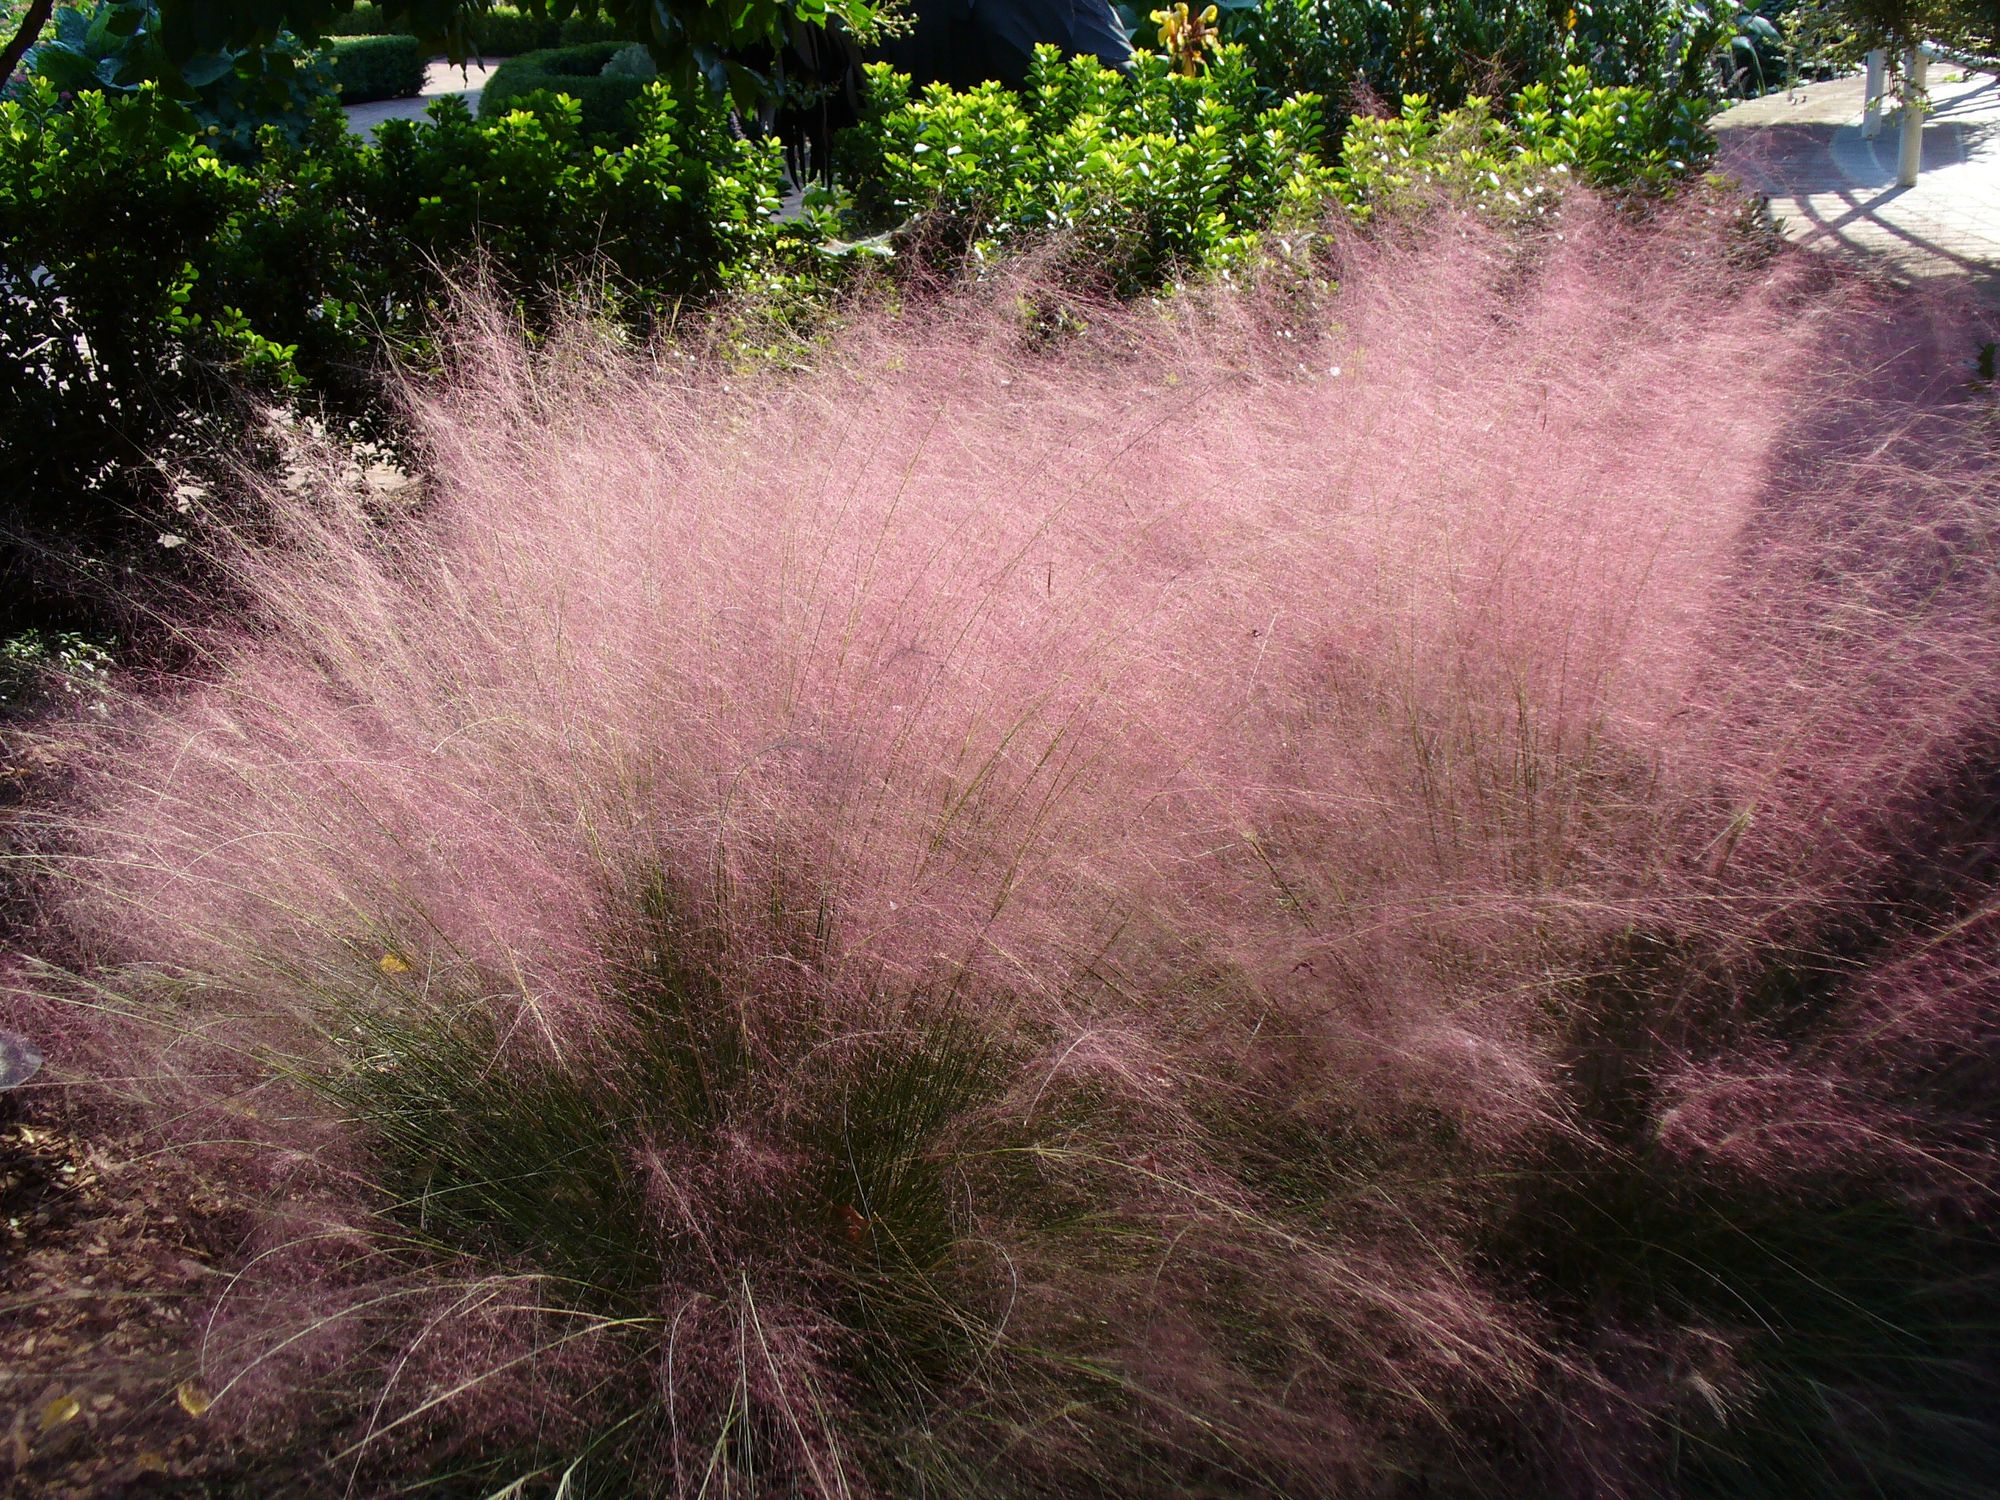 Muhly grass by Ken Kennedy, Flickr